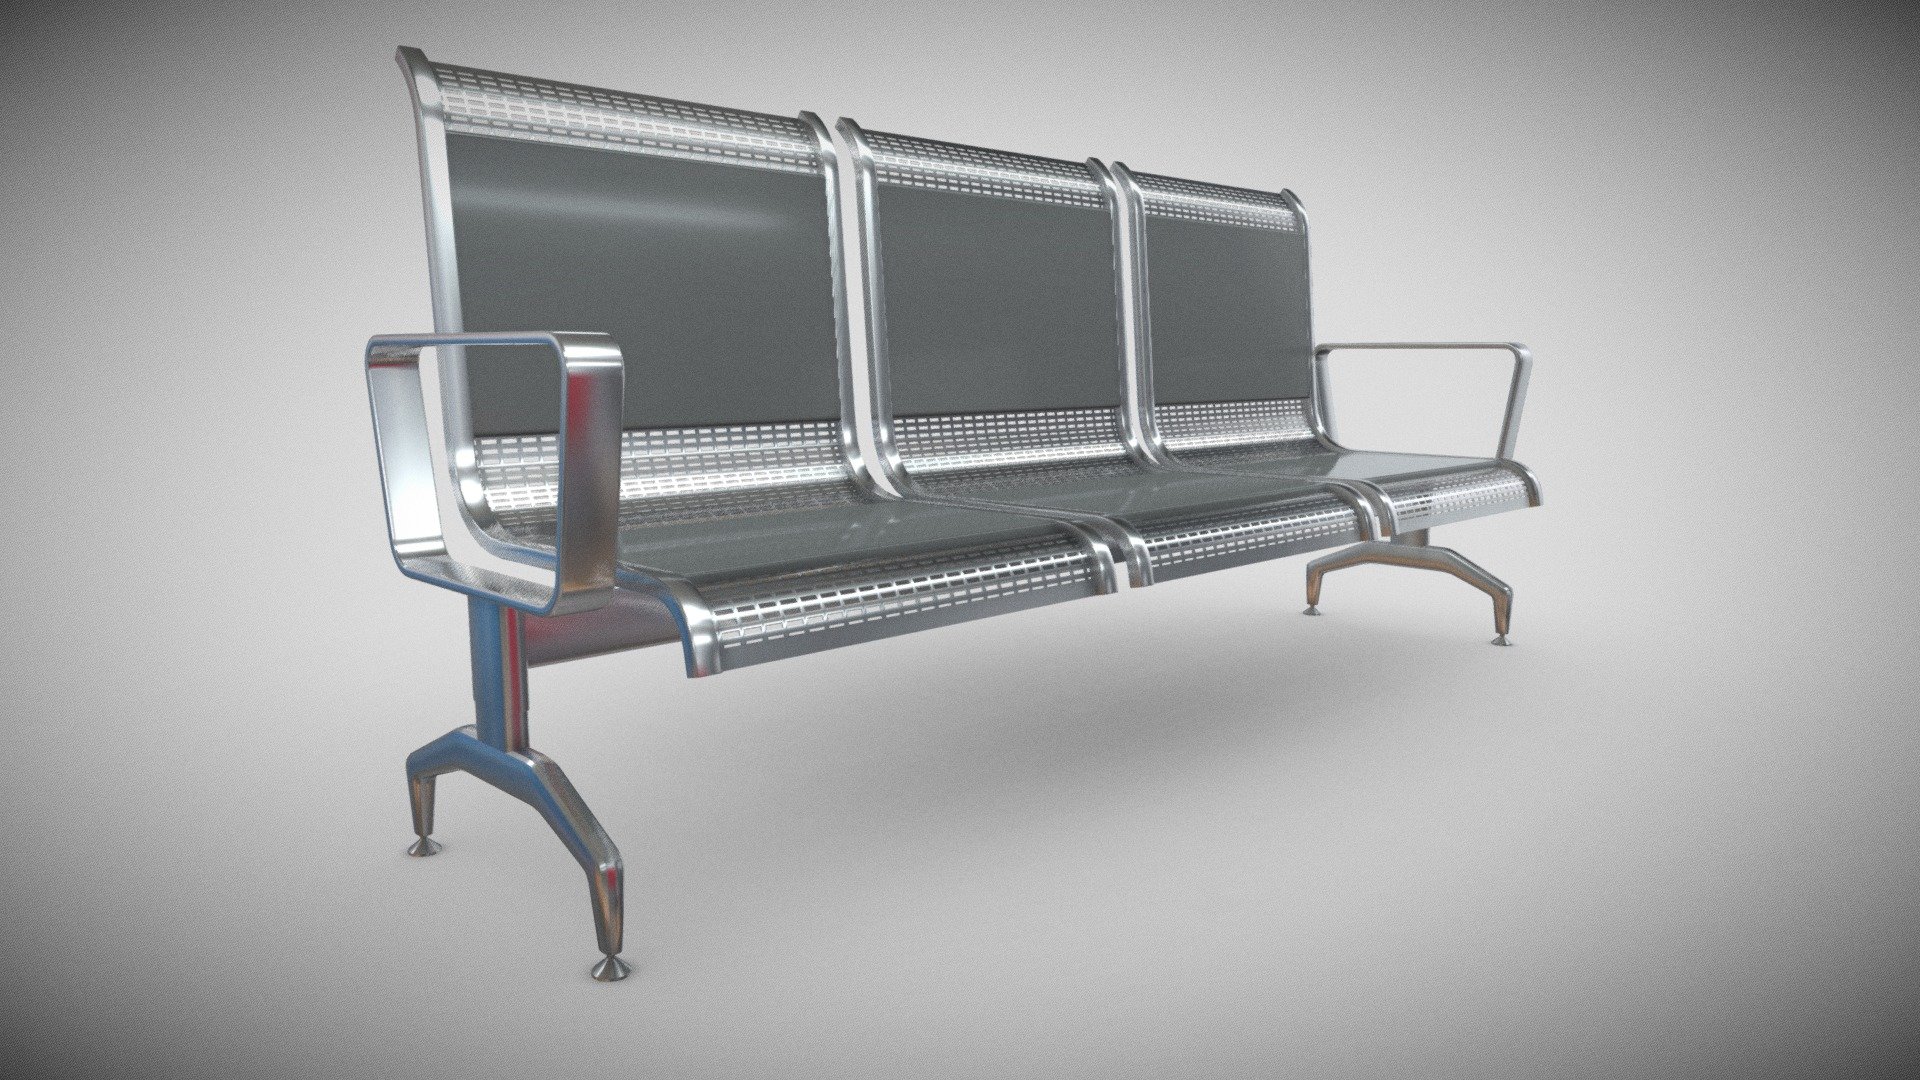 airport chairs can be an impressive element for your projects.
low polygon, fast rendering of realistic appearance, realistic material 3d model